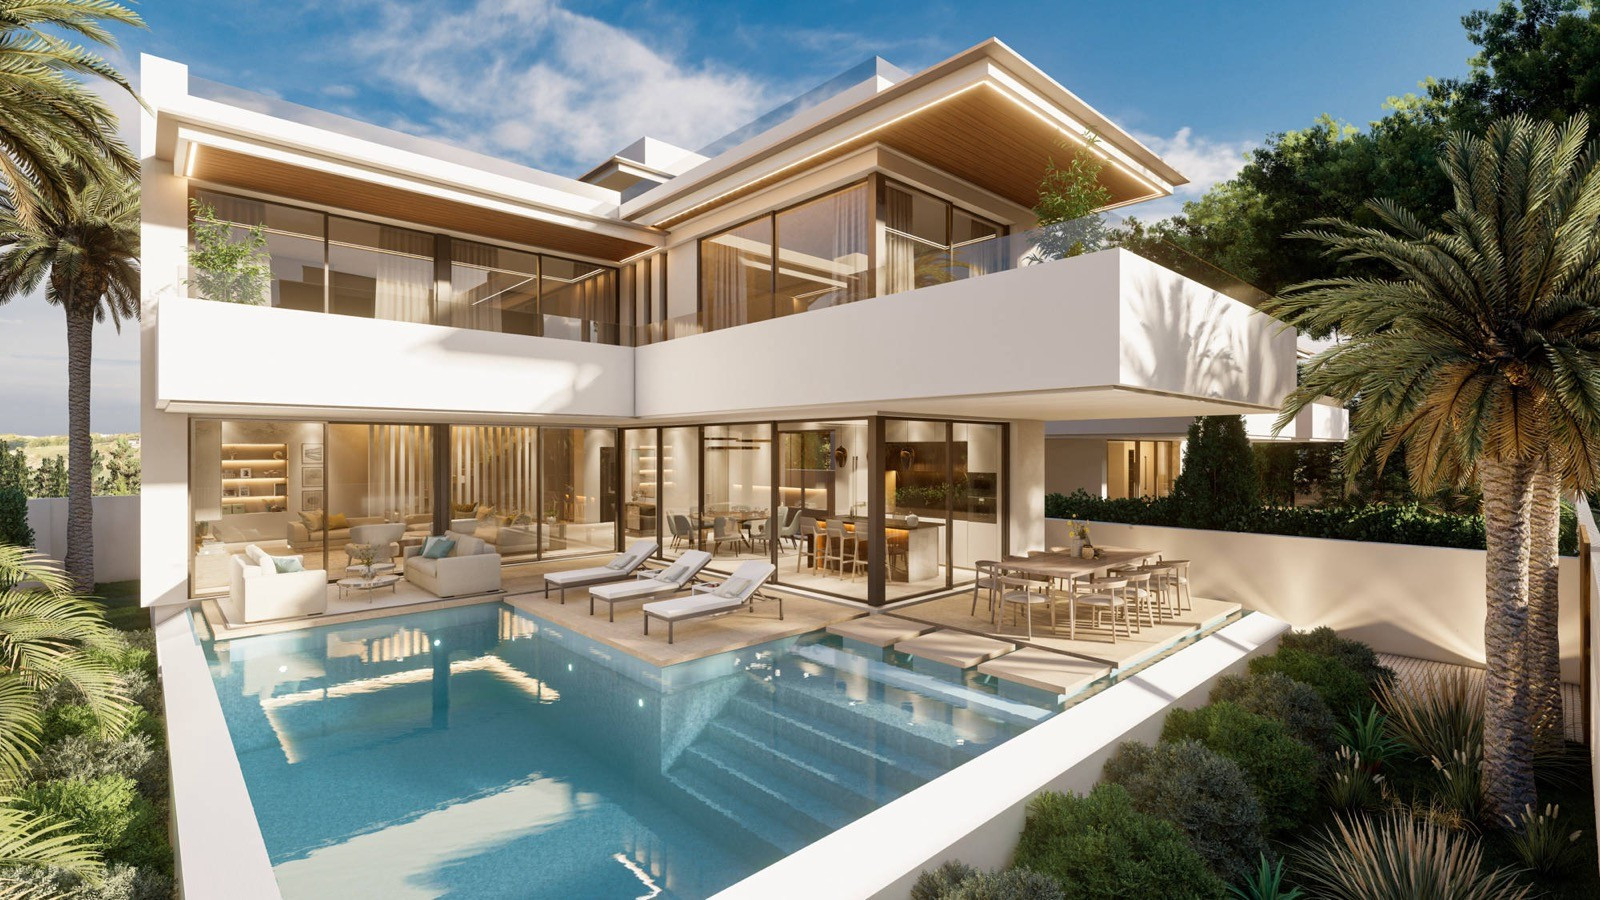 Exclusive villa project located in the privileged location of Cortijo Blanco, only 200 meters away from the beach and a short distance from Puerto Banús and Marbella